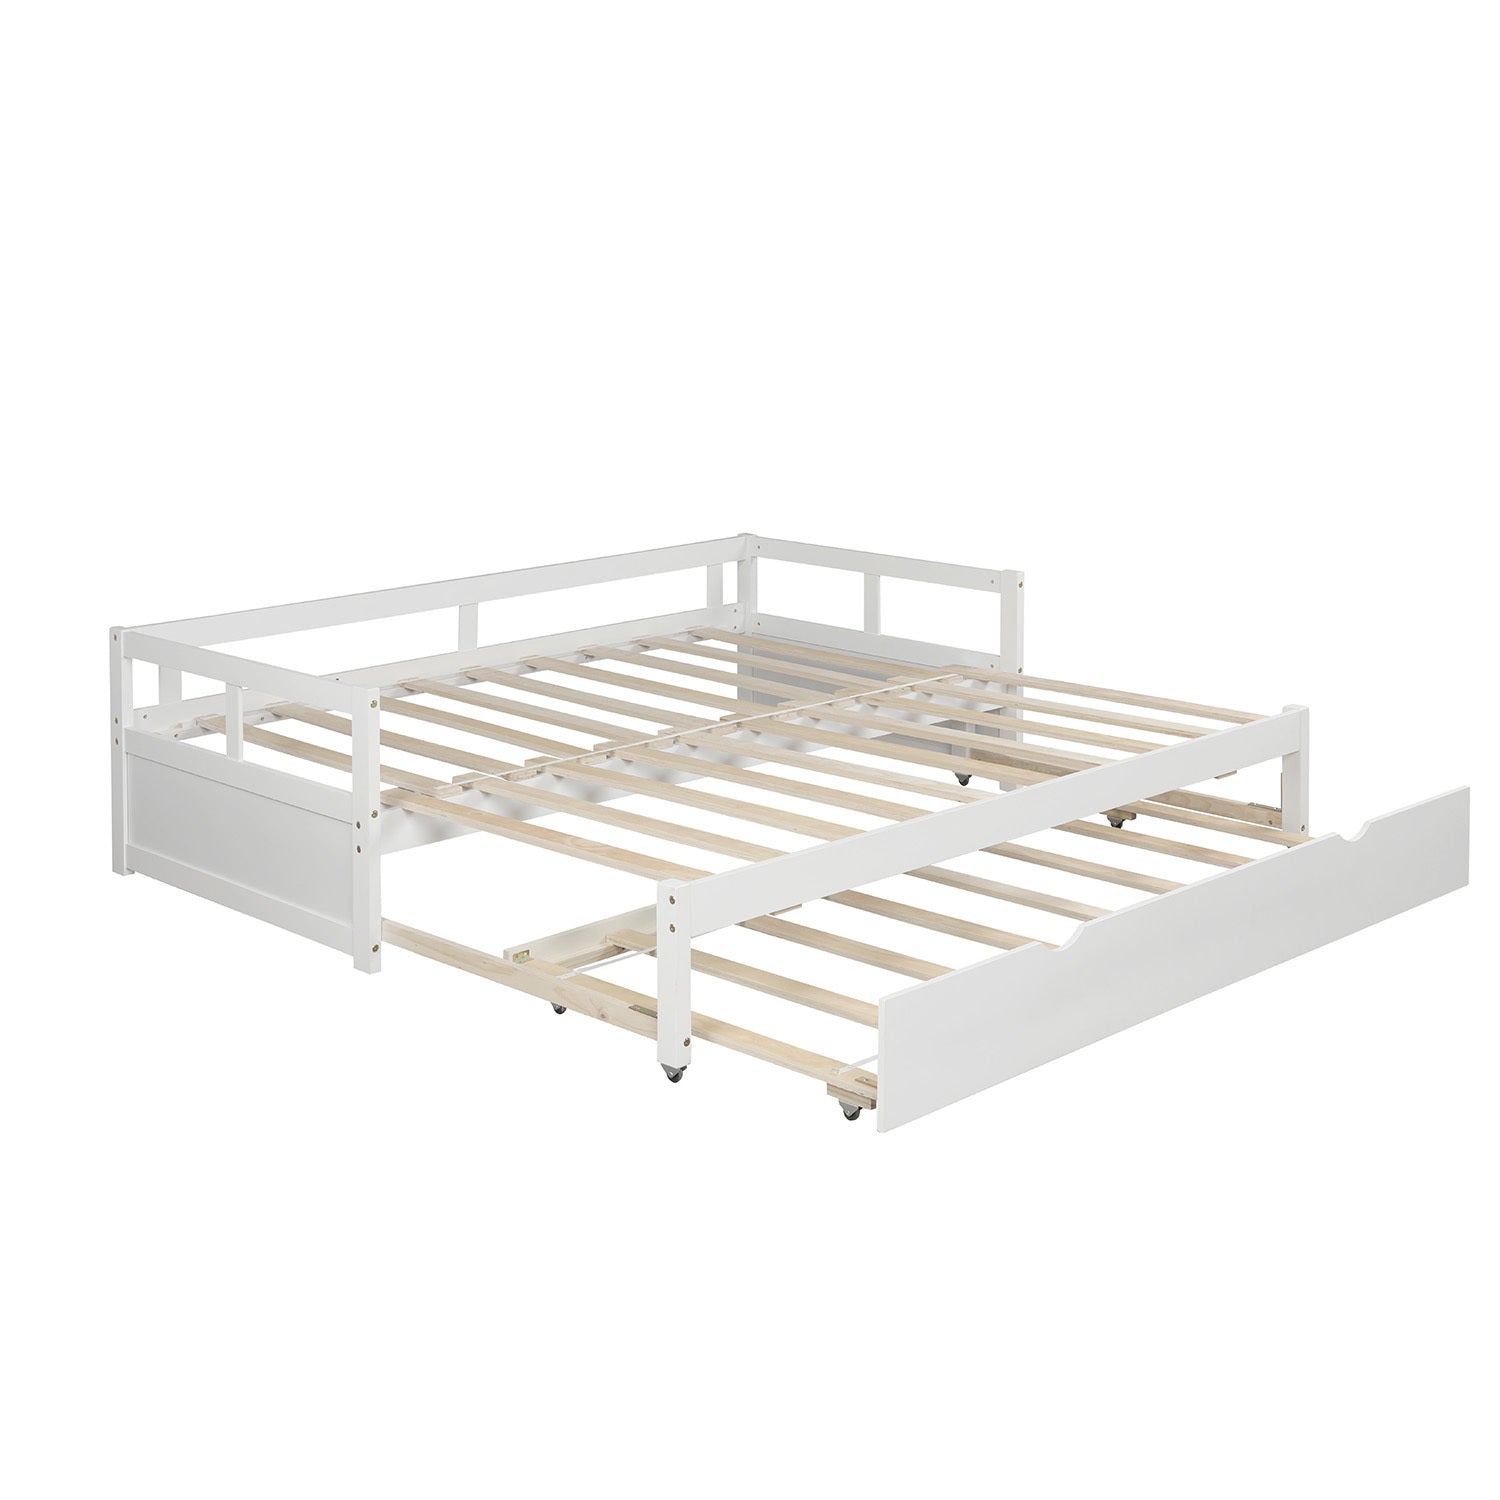 Extending Daybed with Trundle (White)